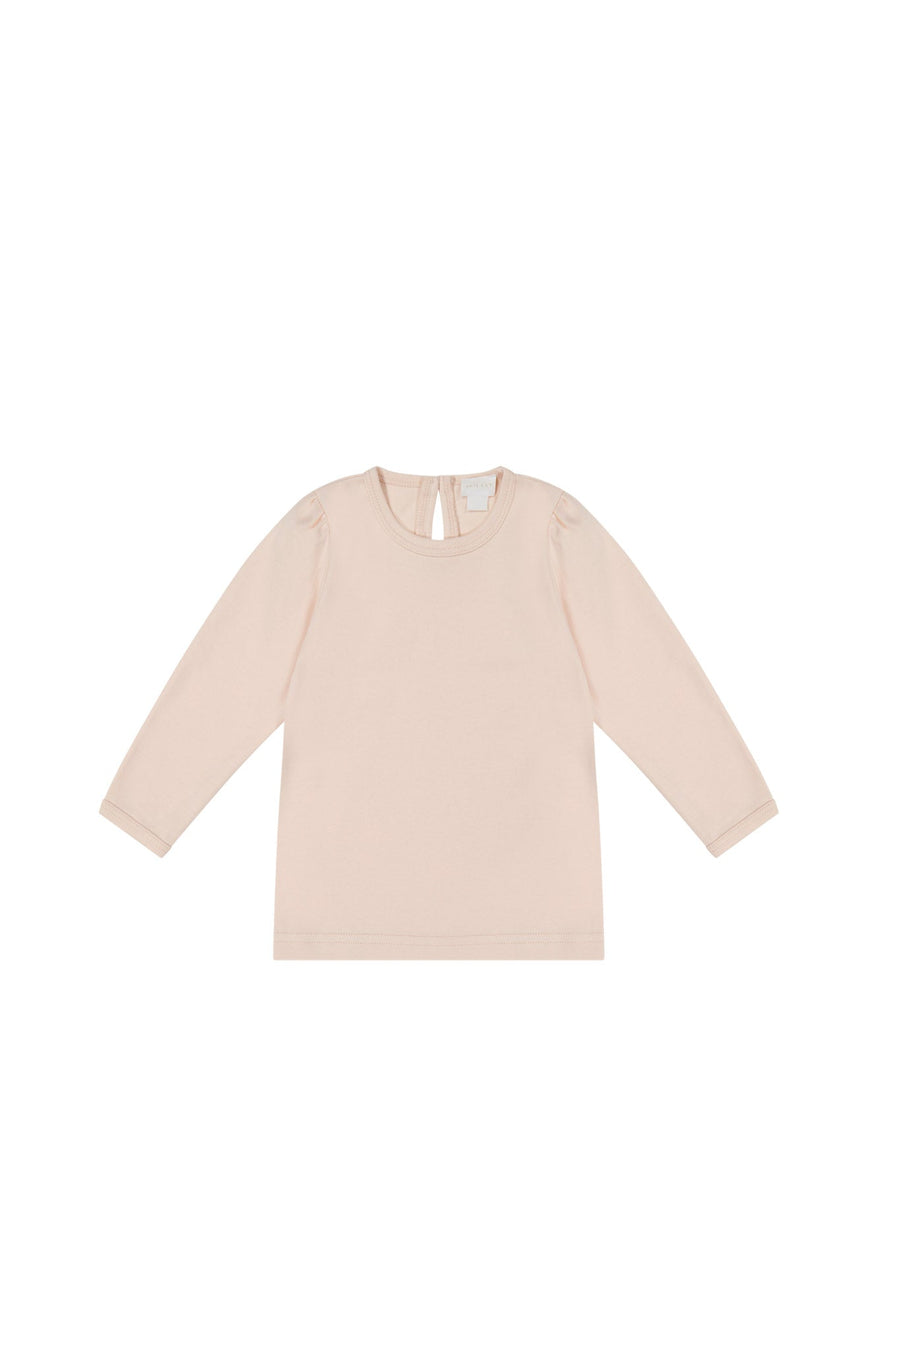 Pima Cotton Cindy Top - Boto Pink Childrens Top from Jamie Kay NZ